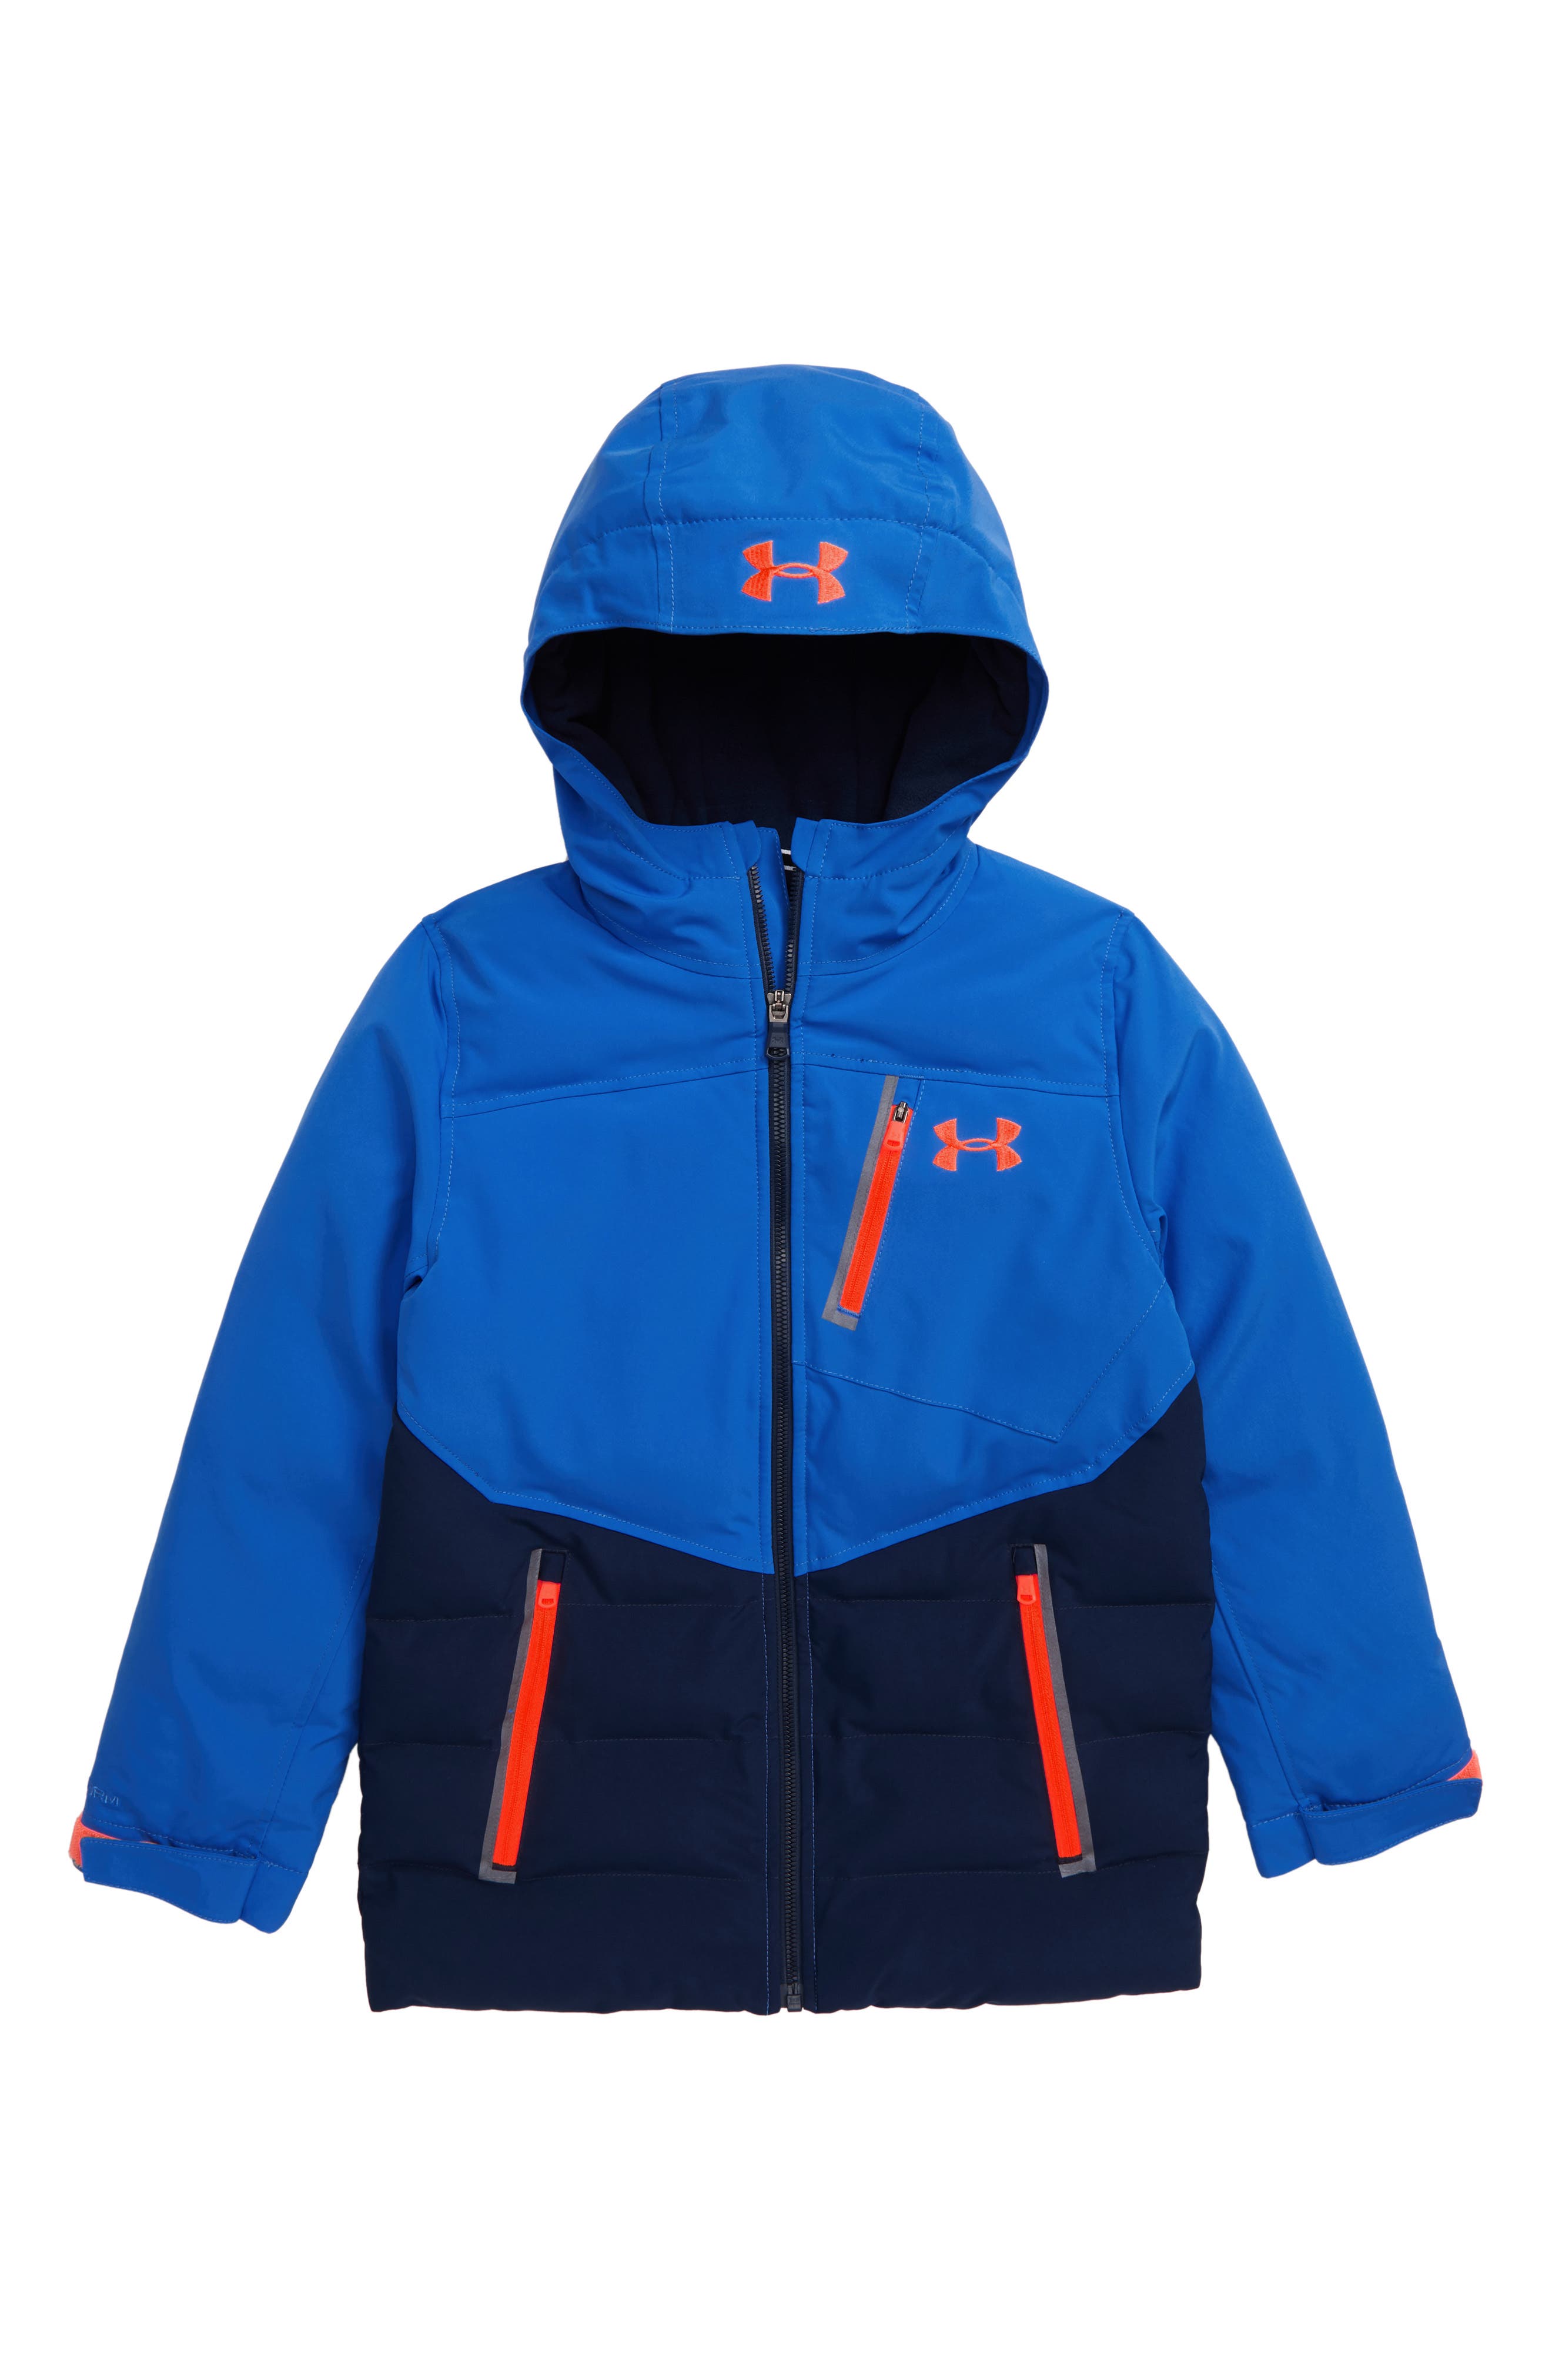 under armor jackets for kids